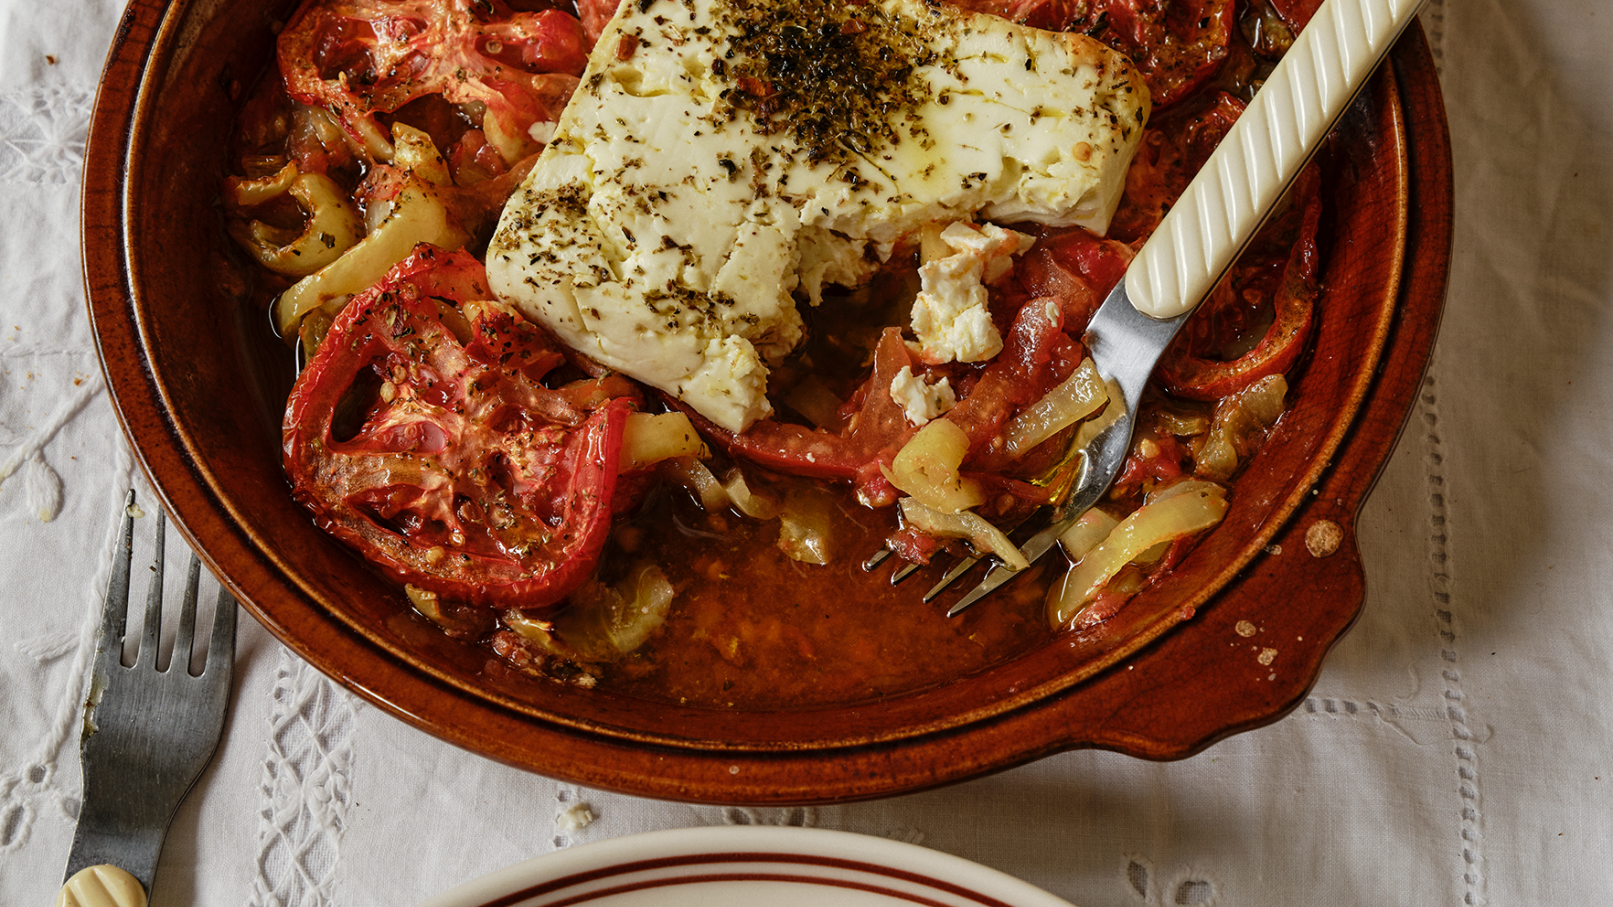 The Mediterranean Cook: 3 seasonal feta recipes to add to your spring table